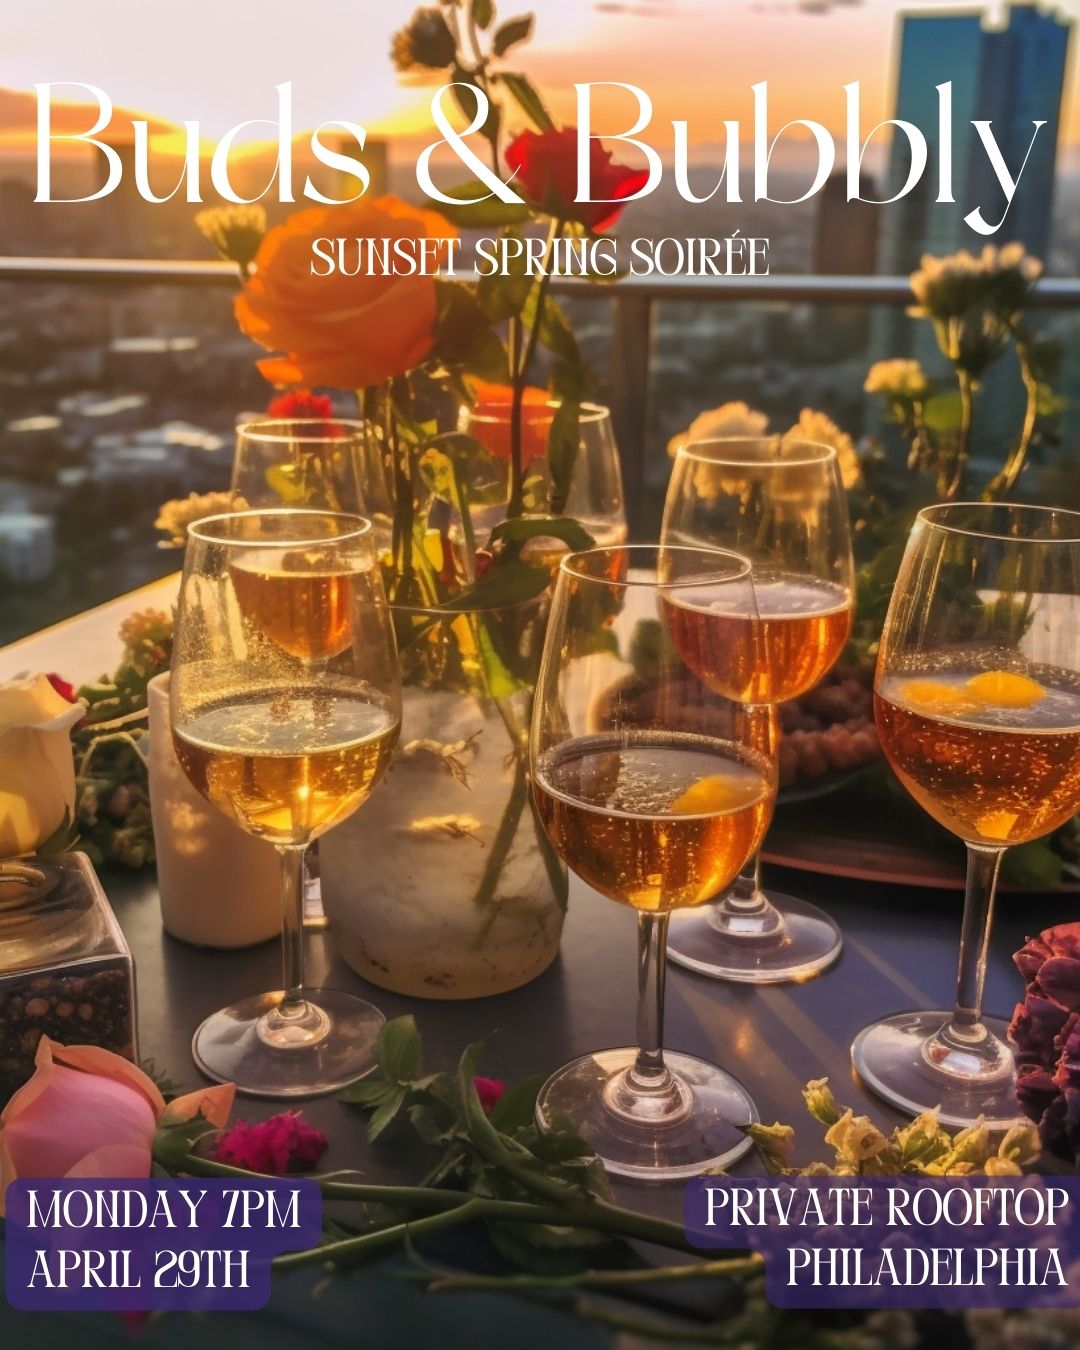 Buds & Bubbly: Sunset Soirée cover image